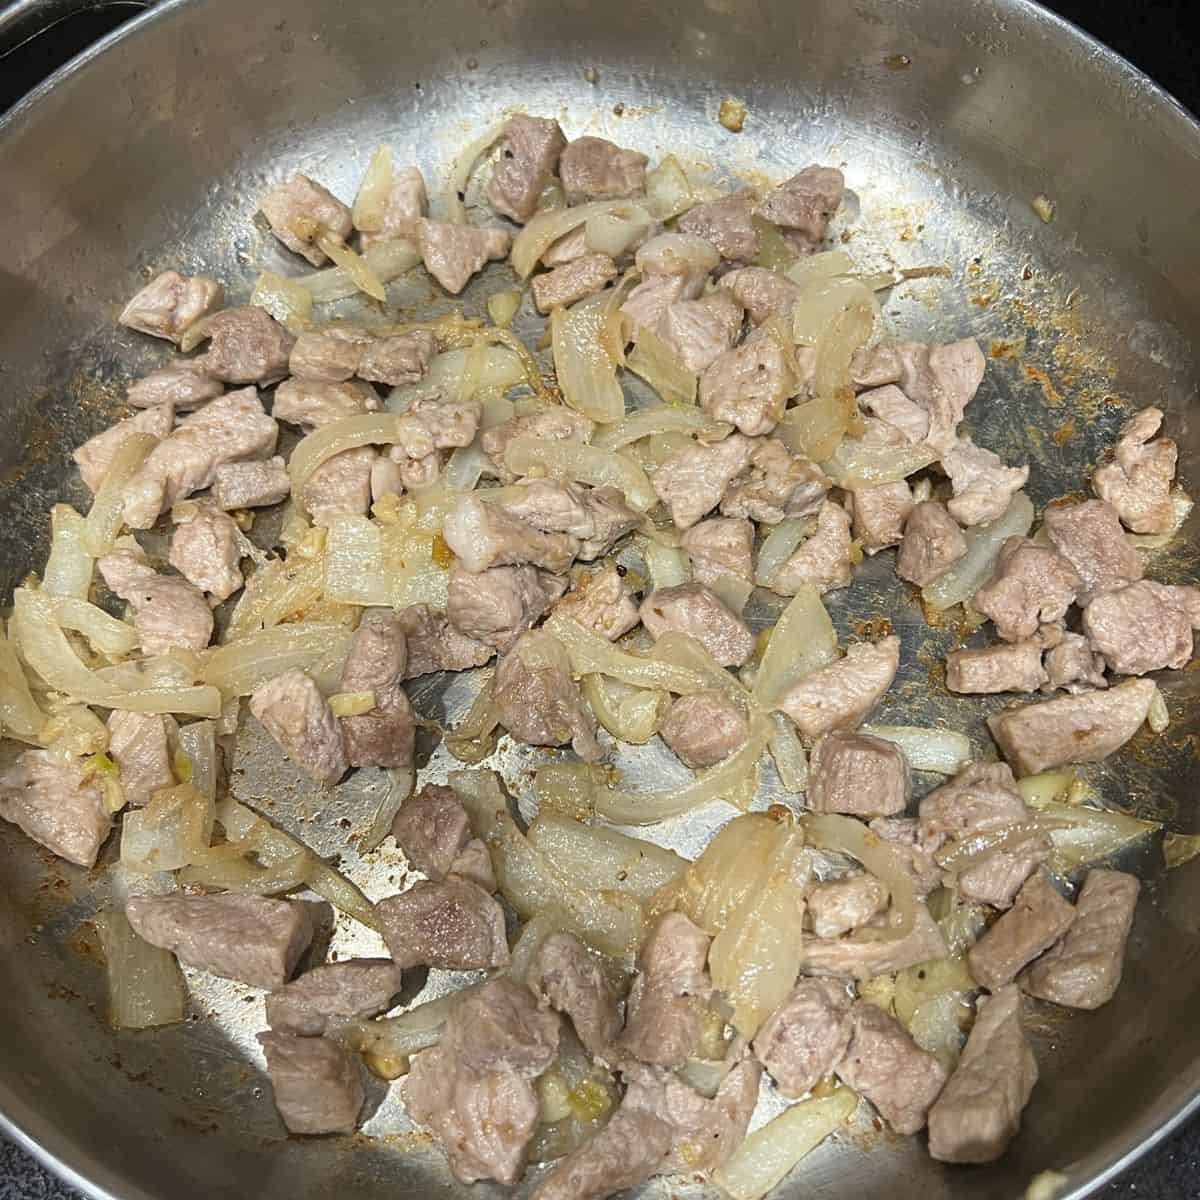 Cooking onion, garlic, and meat in a skillet.